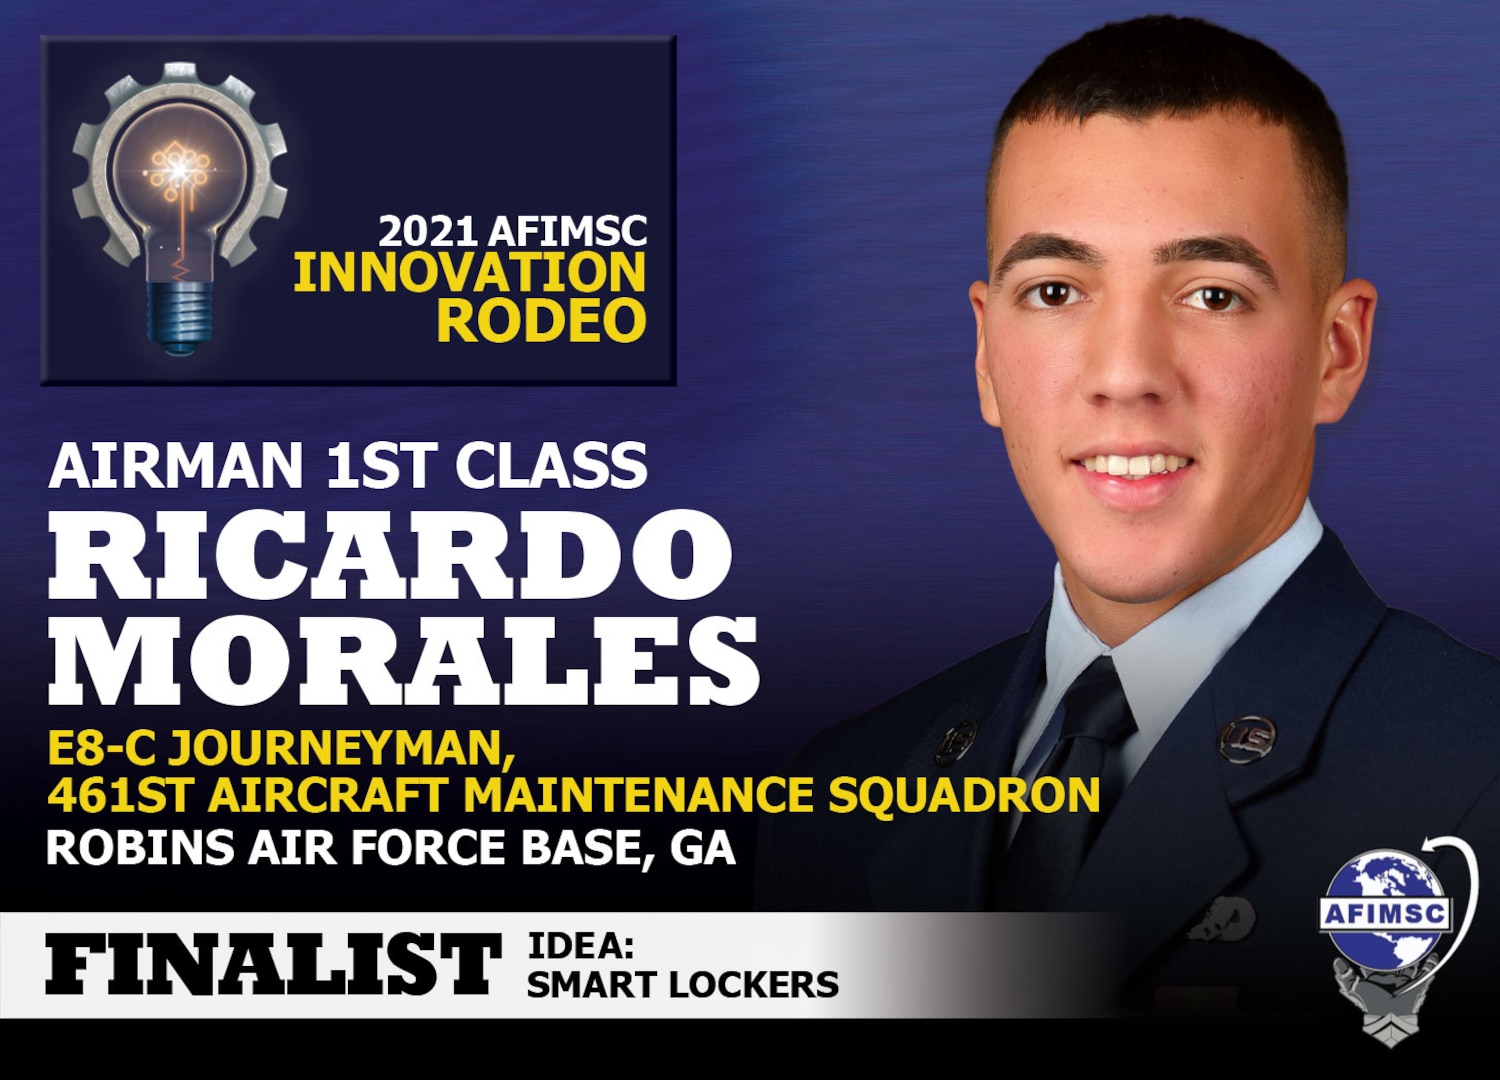 One of eight 2021 AFIMSC Innovation Rodeo finalists, Airman 1st Class Ricardo Morales has an idea for smart lockers: a mail locker system in base dorms for receiving and storing packages for Airmen.